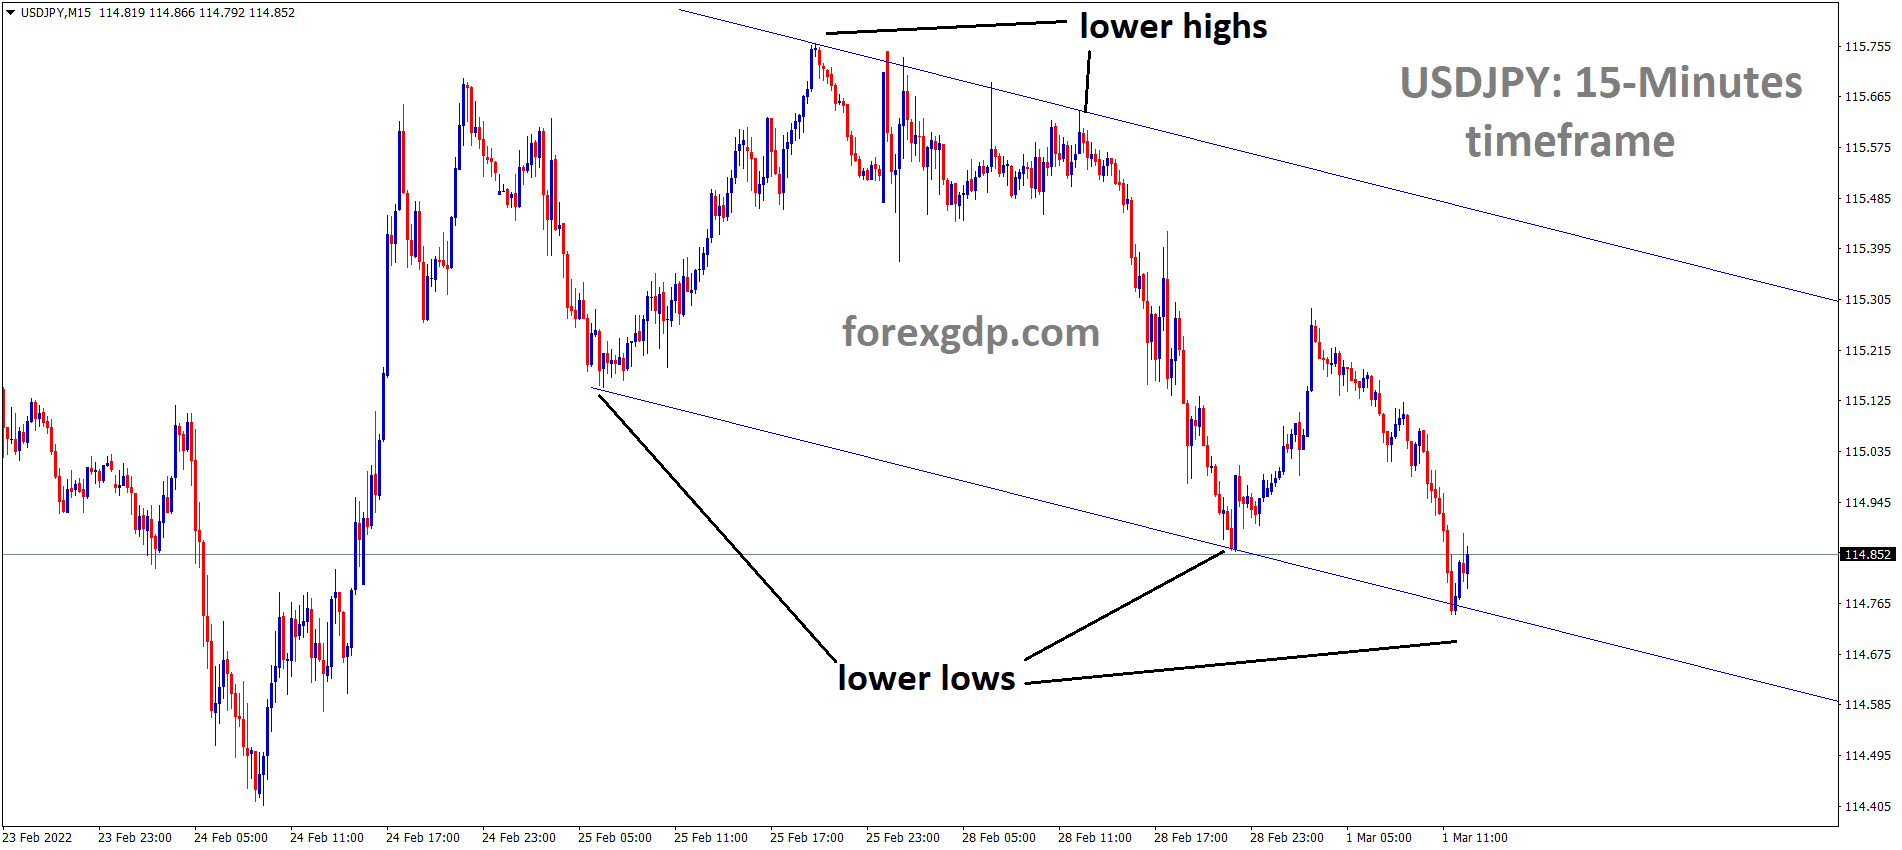 USDJPY is moving in the Descending channel and the market has rebounded from the lower low area of the channel.